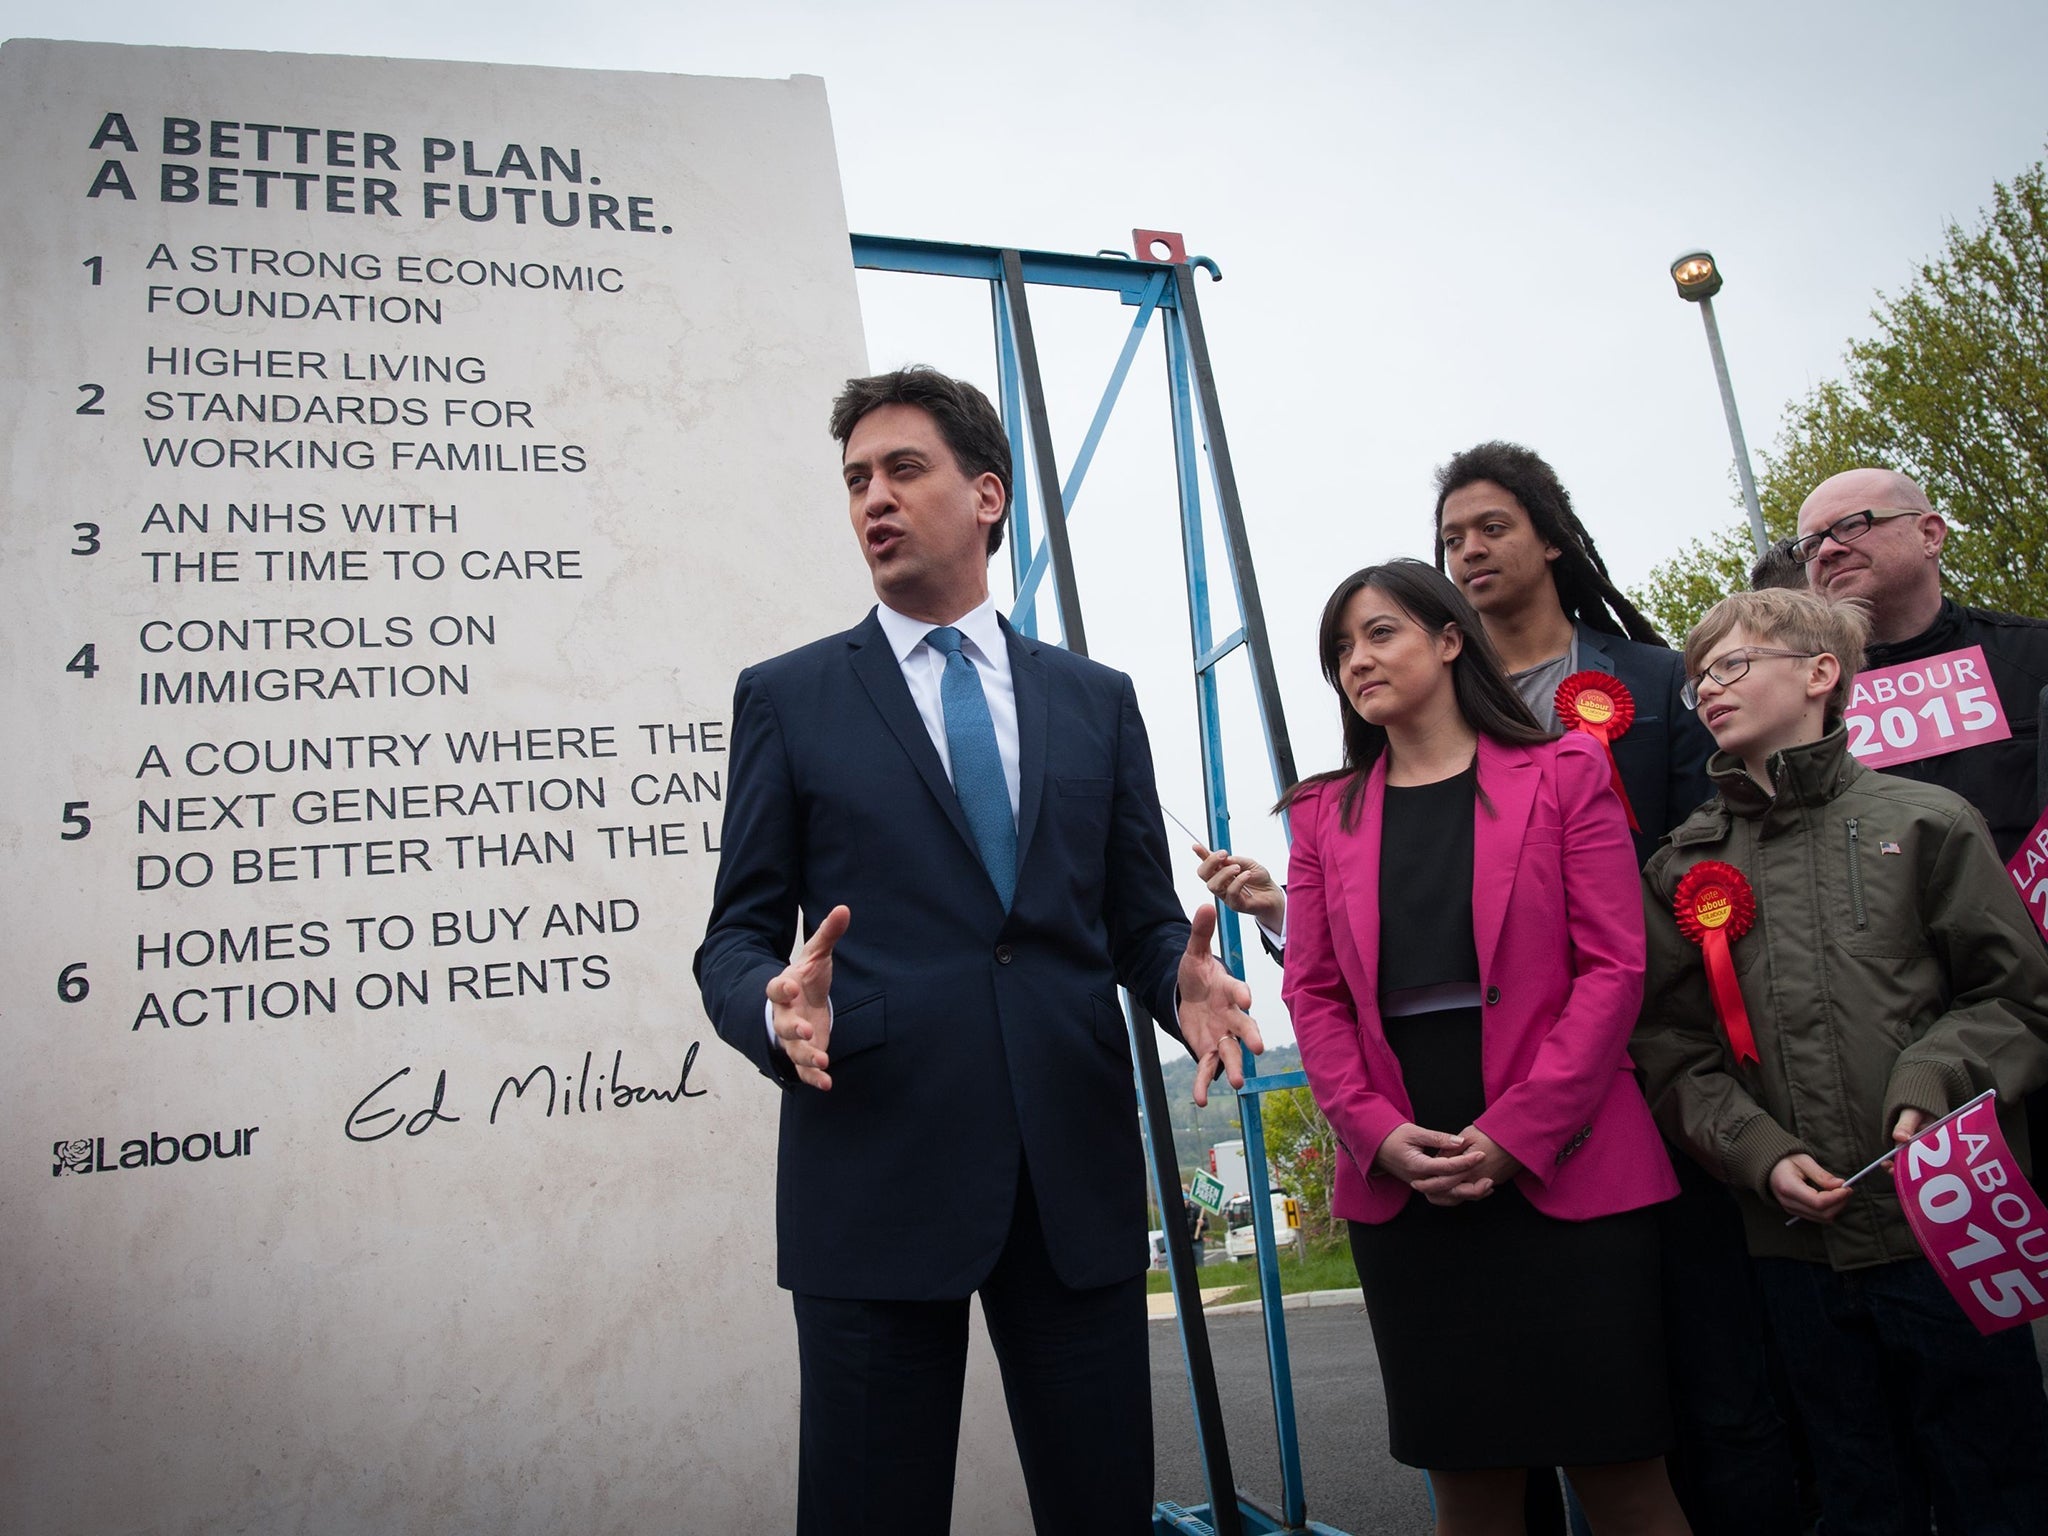 Miliband unveiling Labour’s pledges carved in stone in Hastings on 3 May